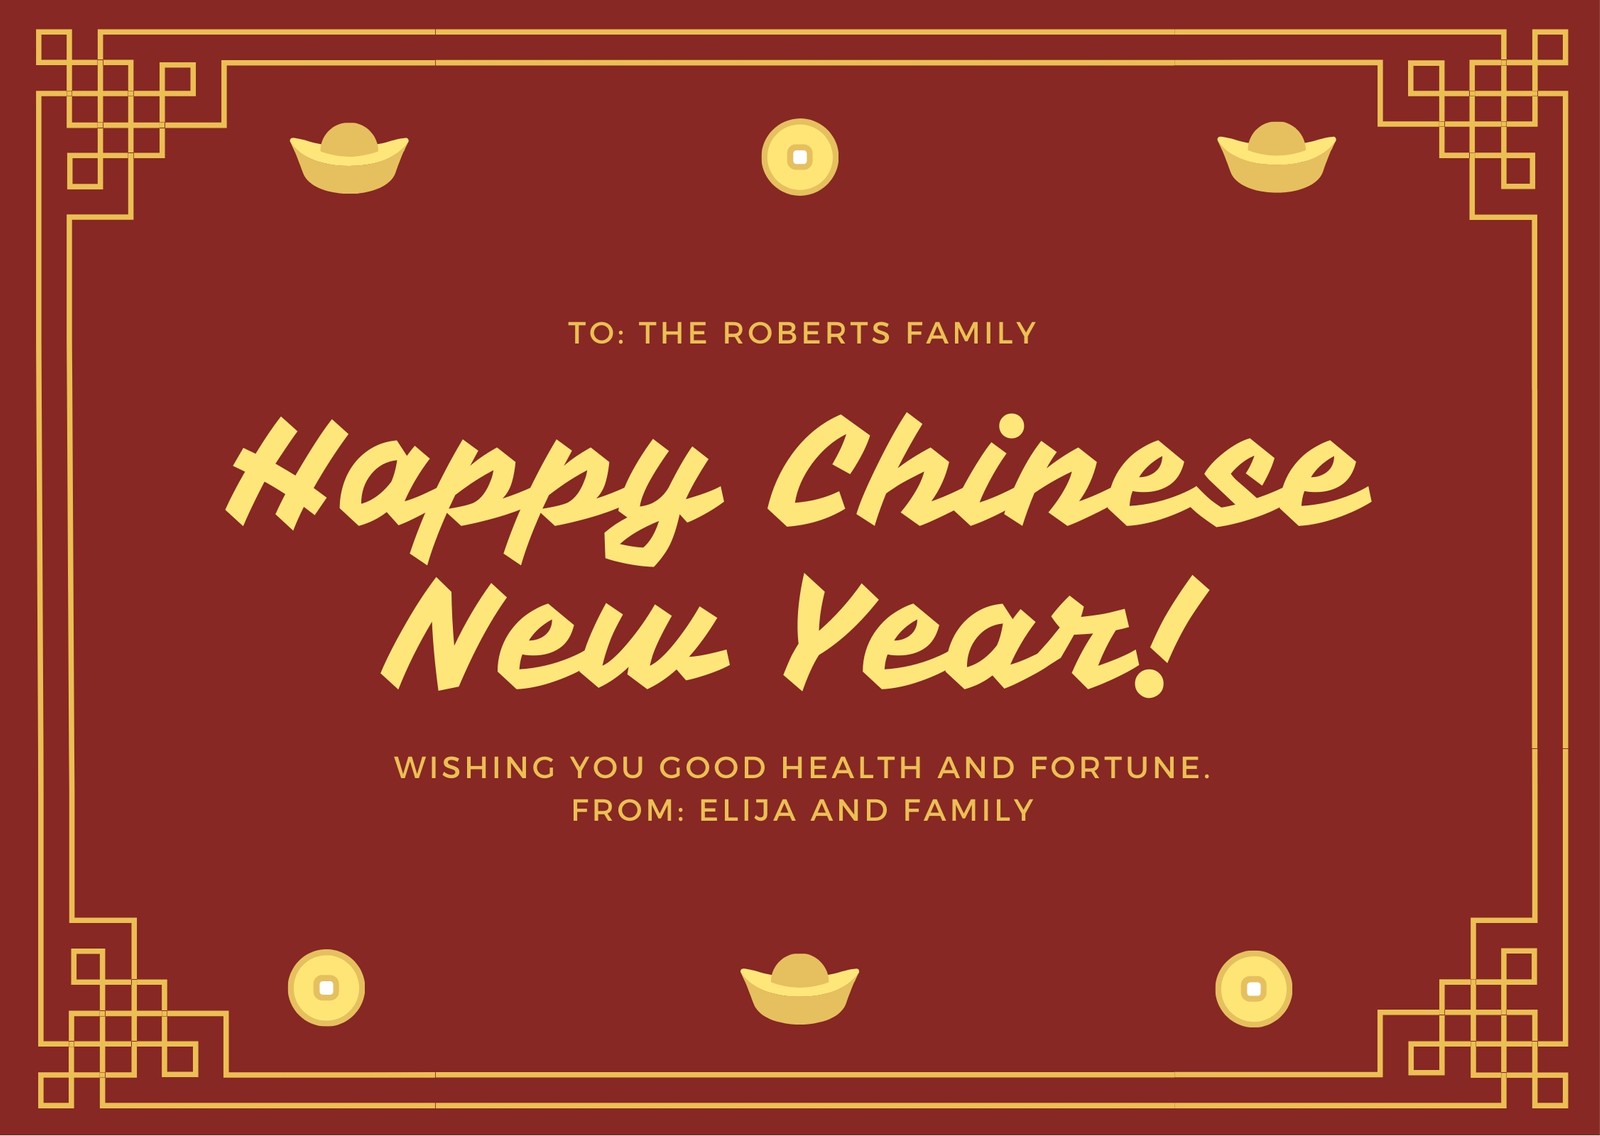 customize-50-chinese-new-year-cards-templates-online-canva